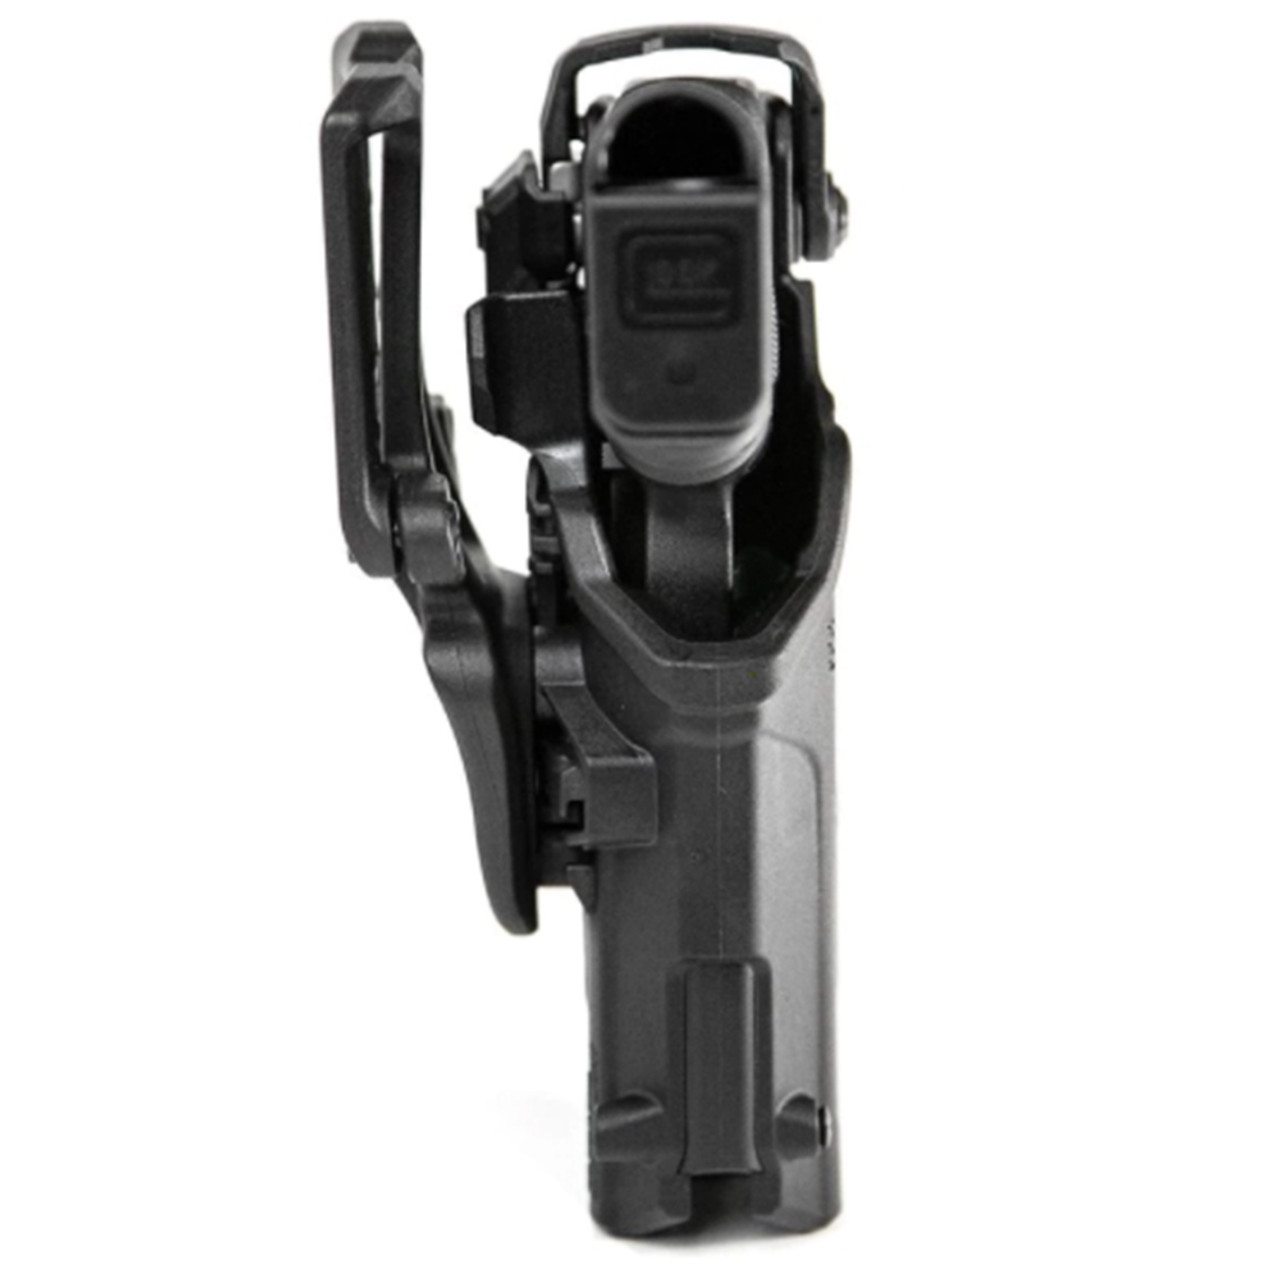 BLACKHAWK 44N6 T-SERIES L3D Light Bearing Duty Holsters with weapon option, available in Left or Right Hand Options, Black